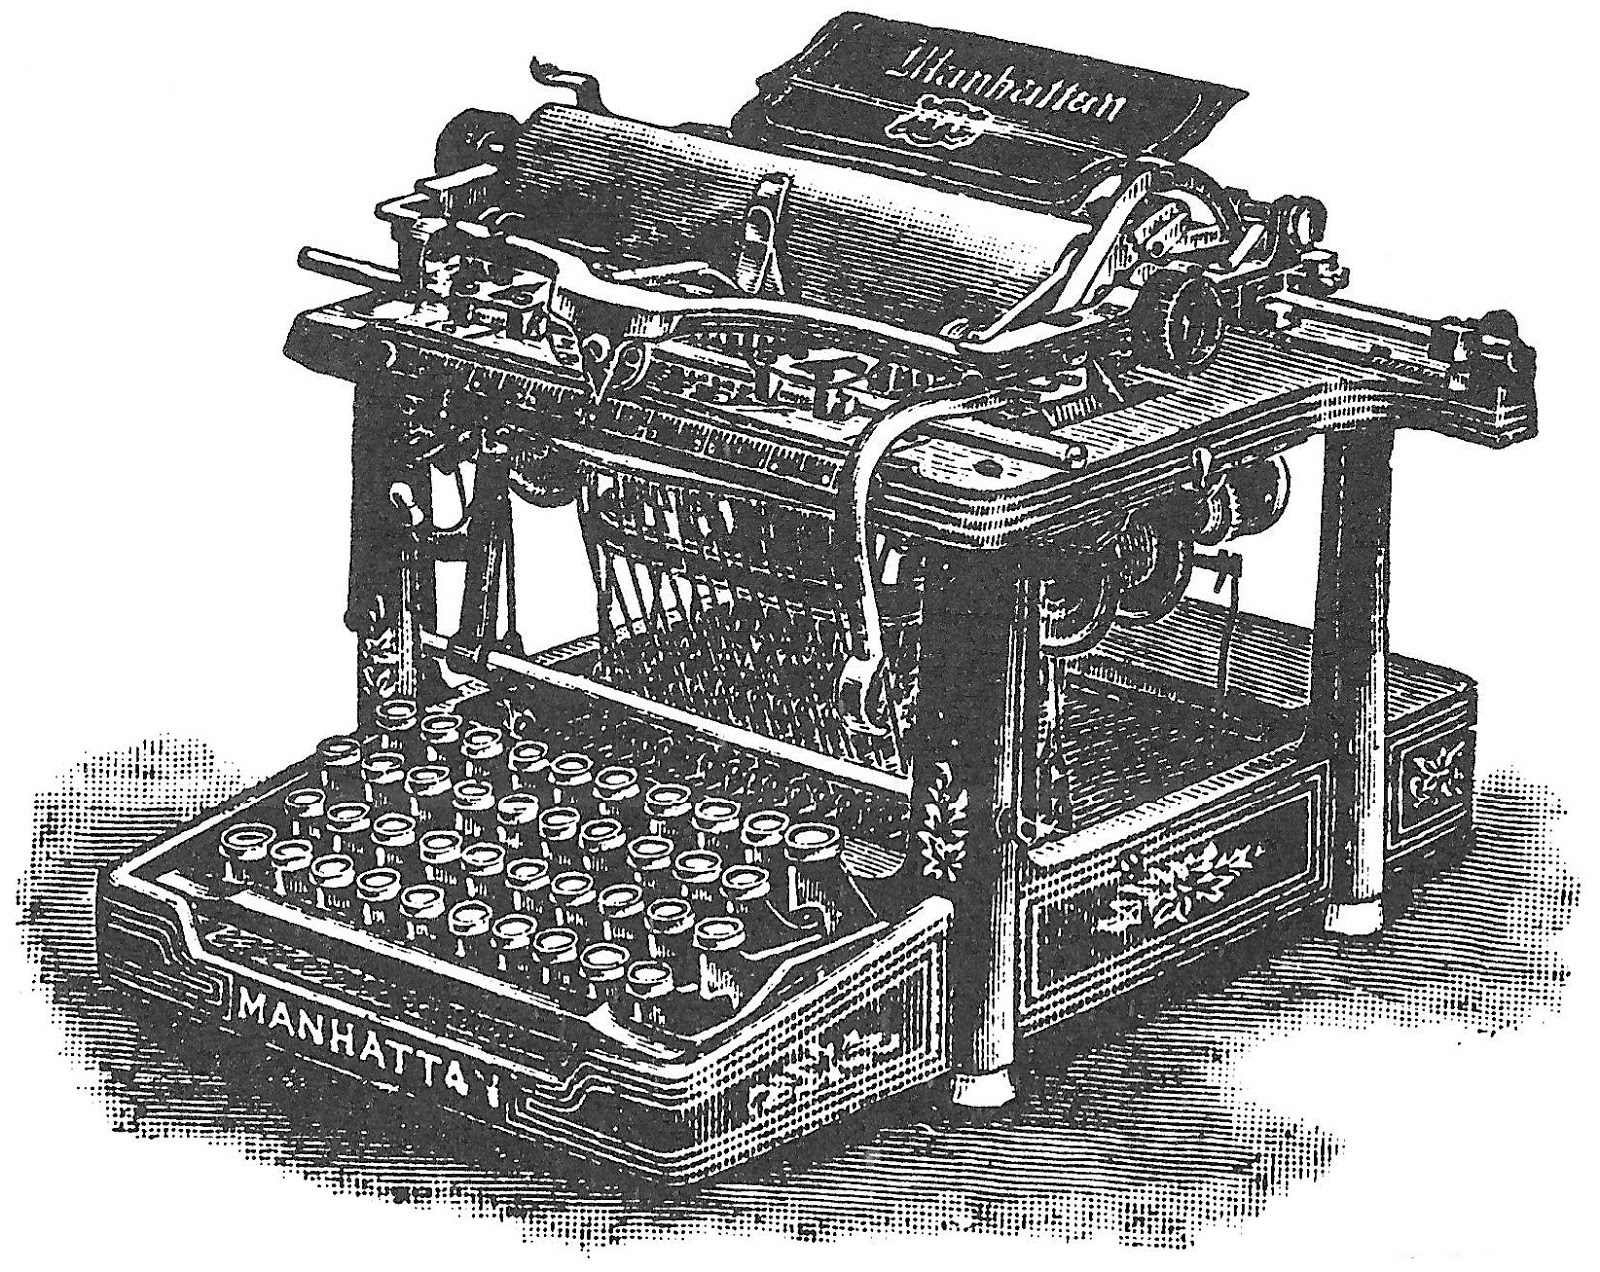 oz.Typewriter: On This Day in Typewriter History: The Manhattan and the ...